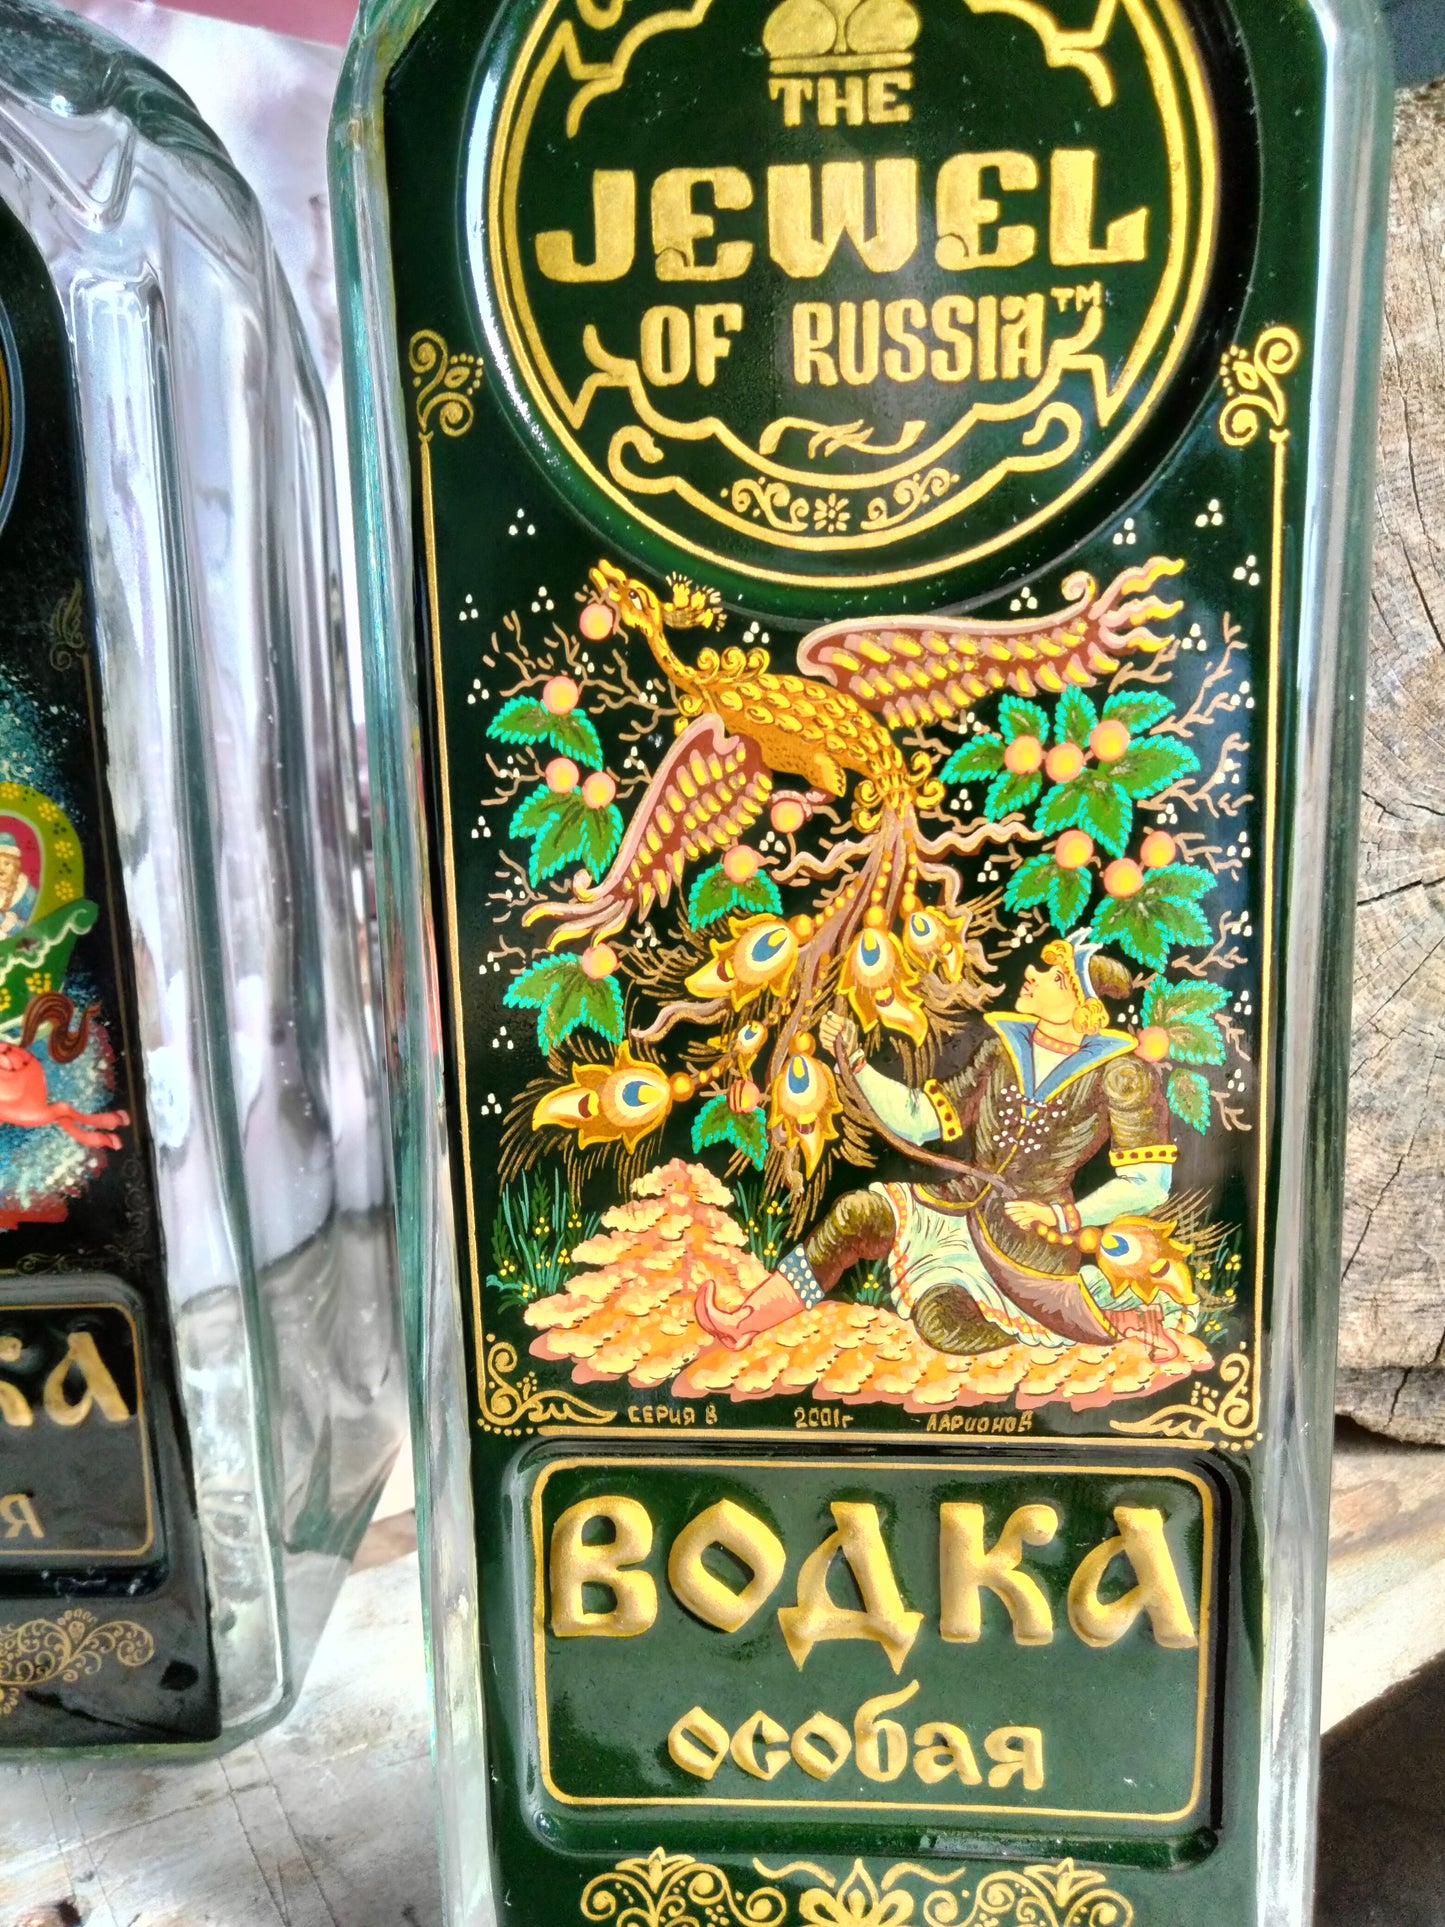 The Jewel Of Russia Ultra Limited Back Bar Display Bottle ( ONE BOTTLE 3 Liter volume, Empty)